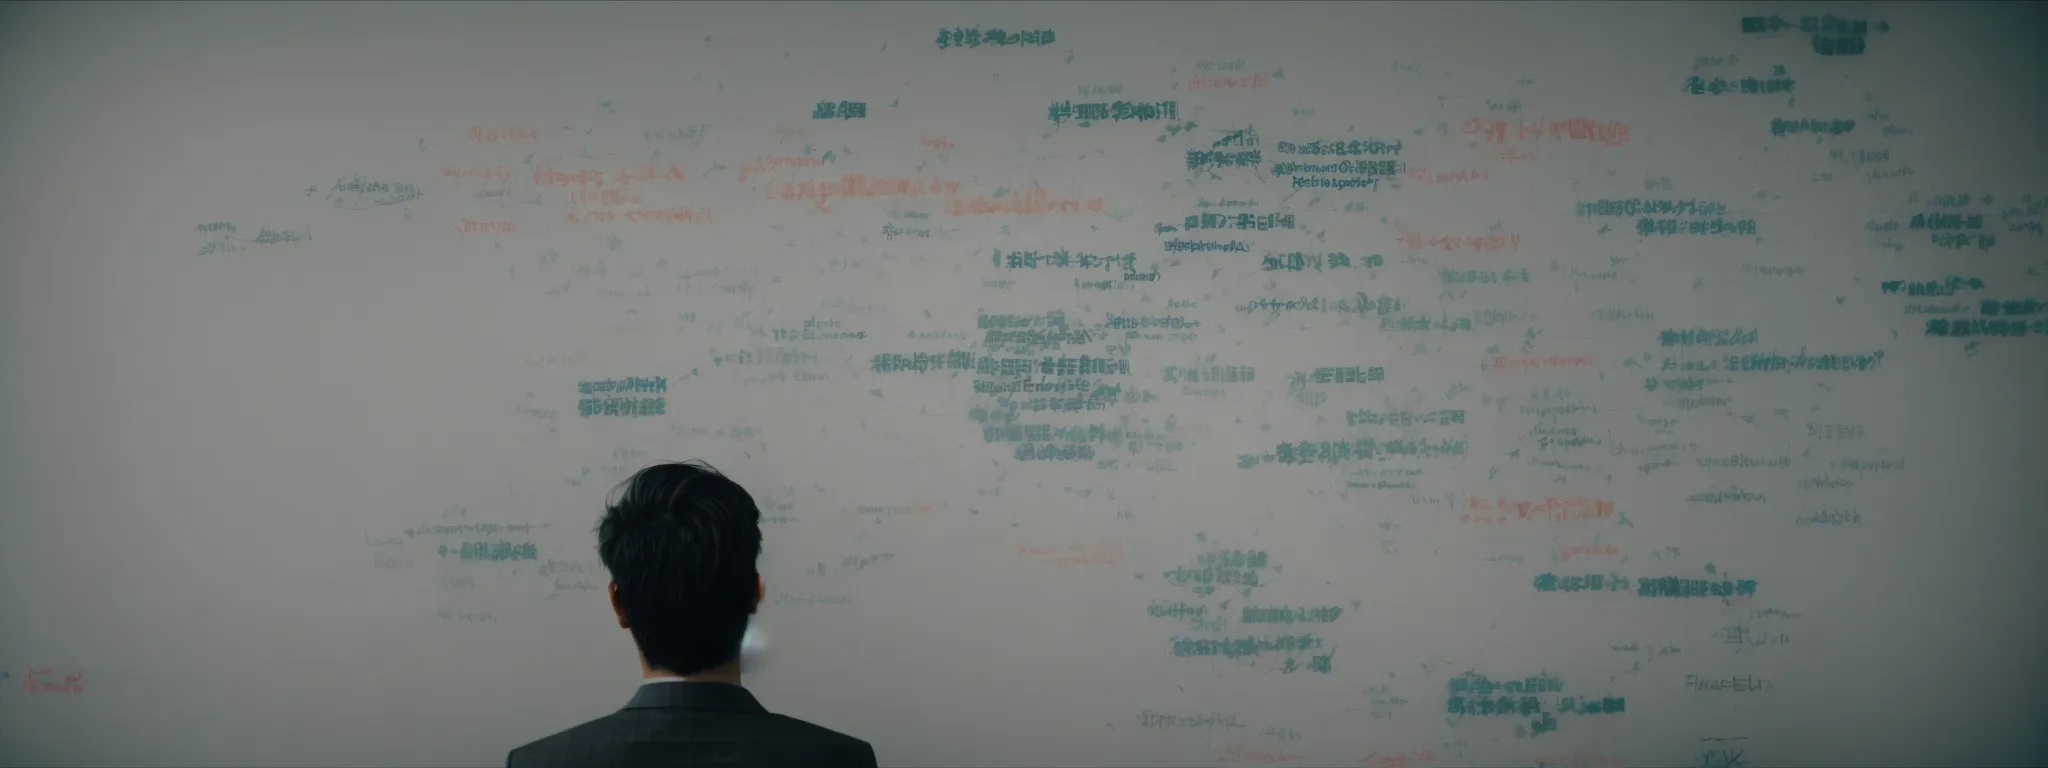 a person brainstorming content ideas on a whiteboard with a web of interconnected words.